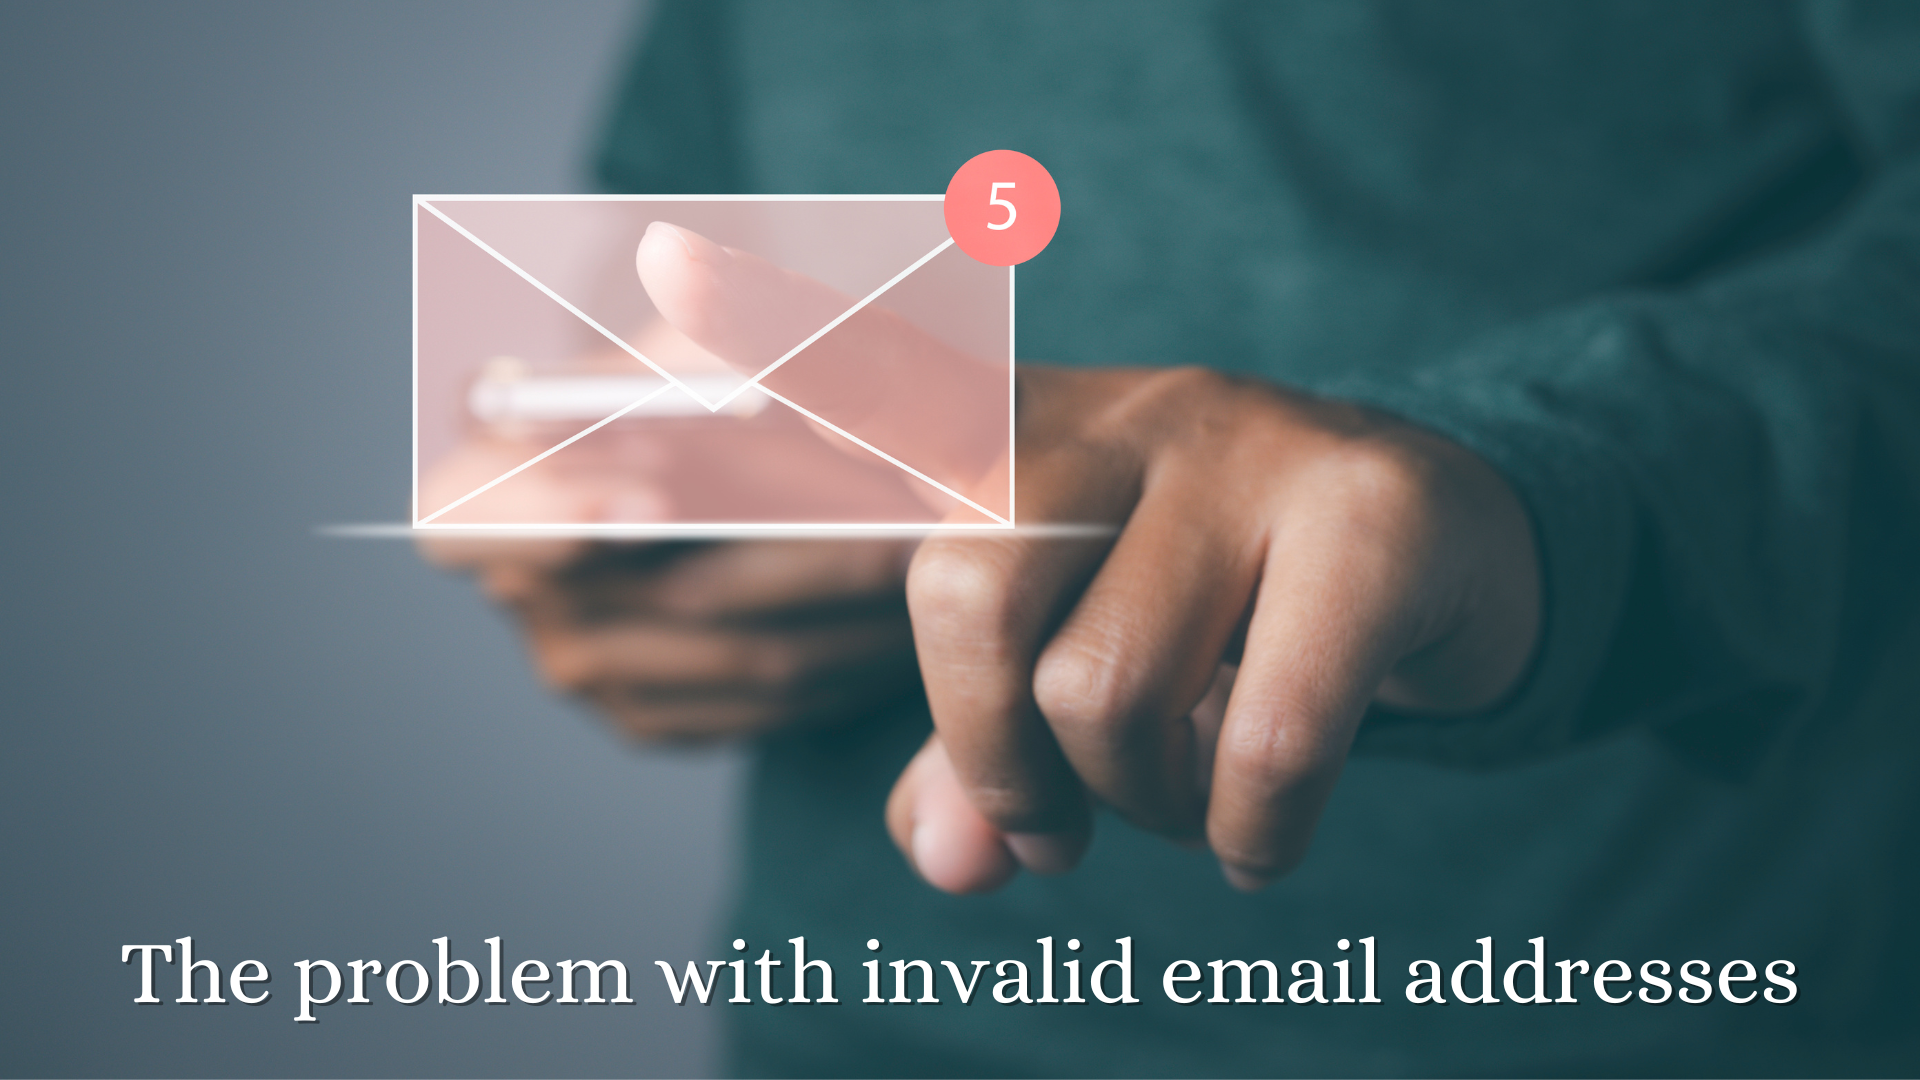 The problem with invalid email addresses